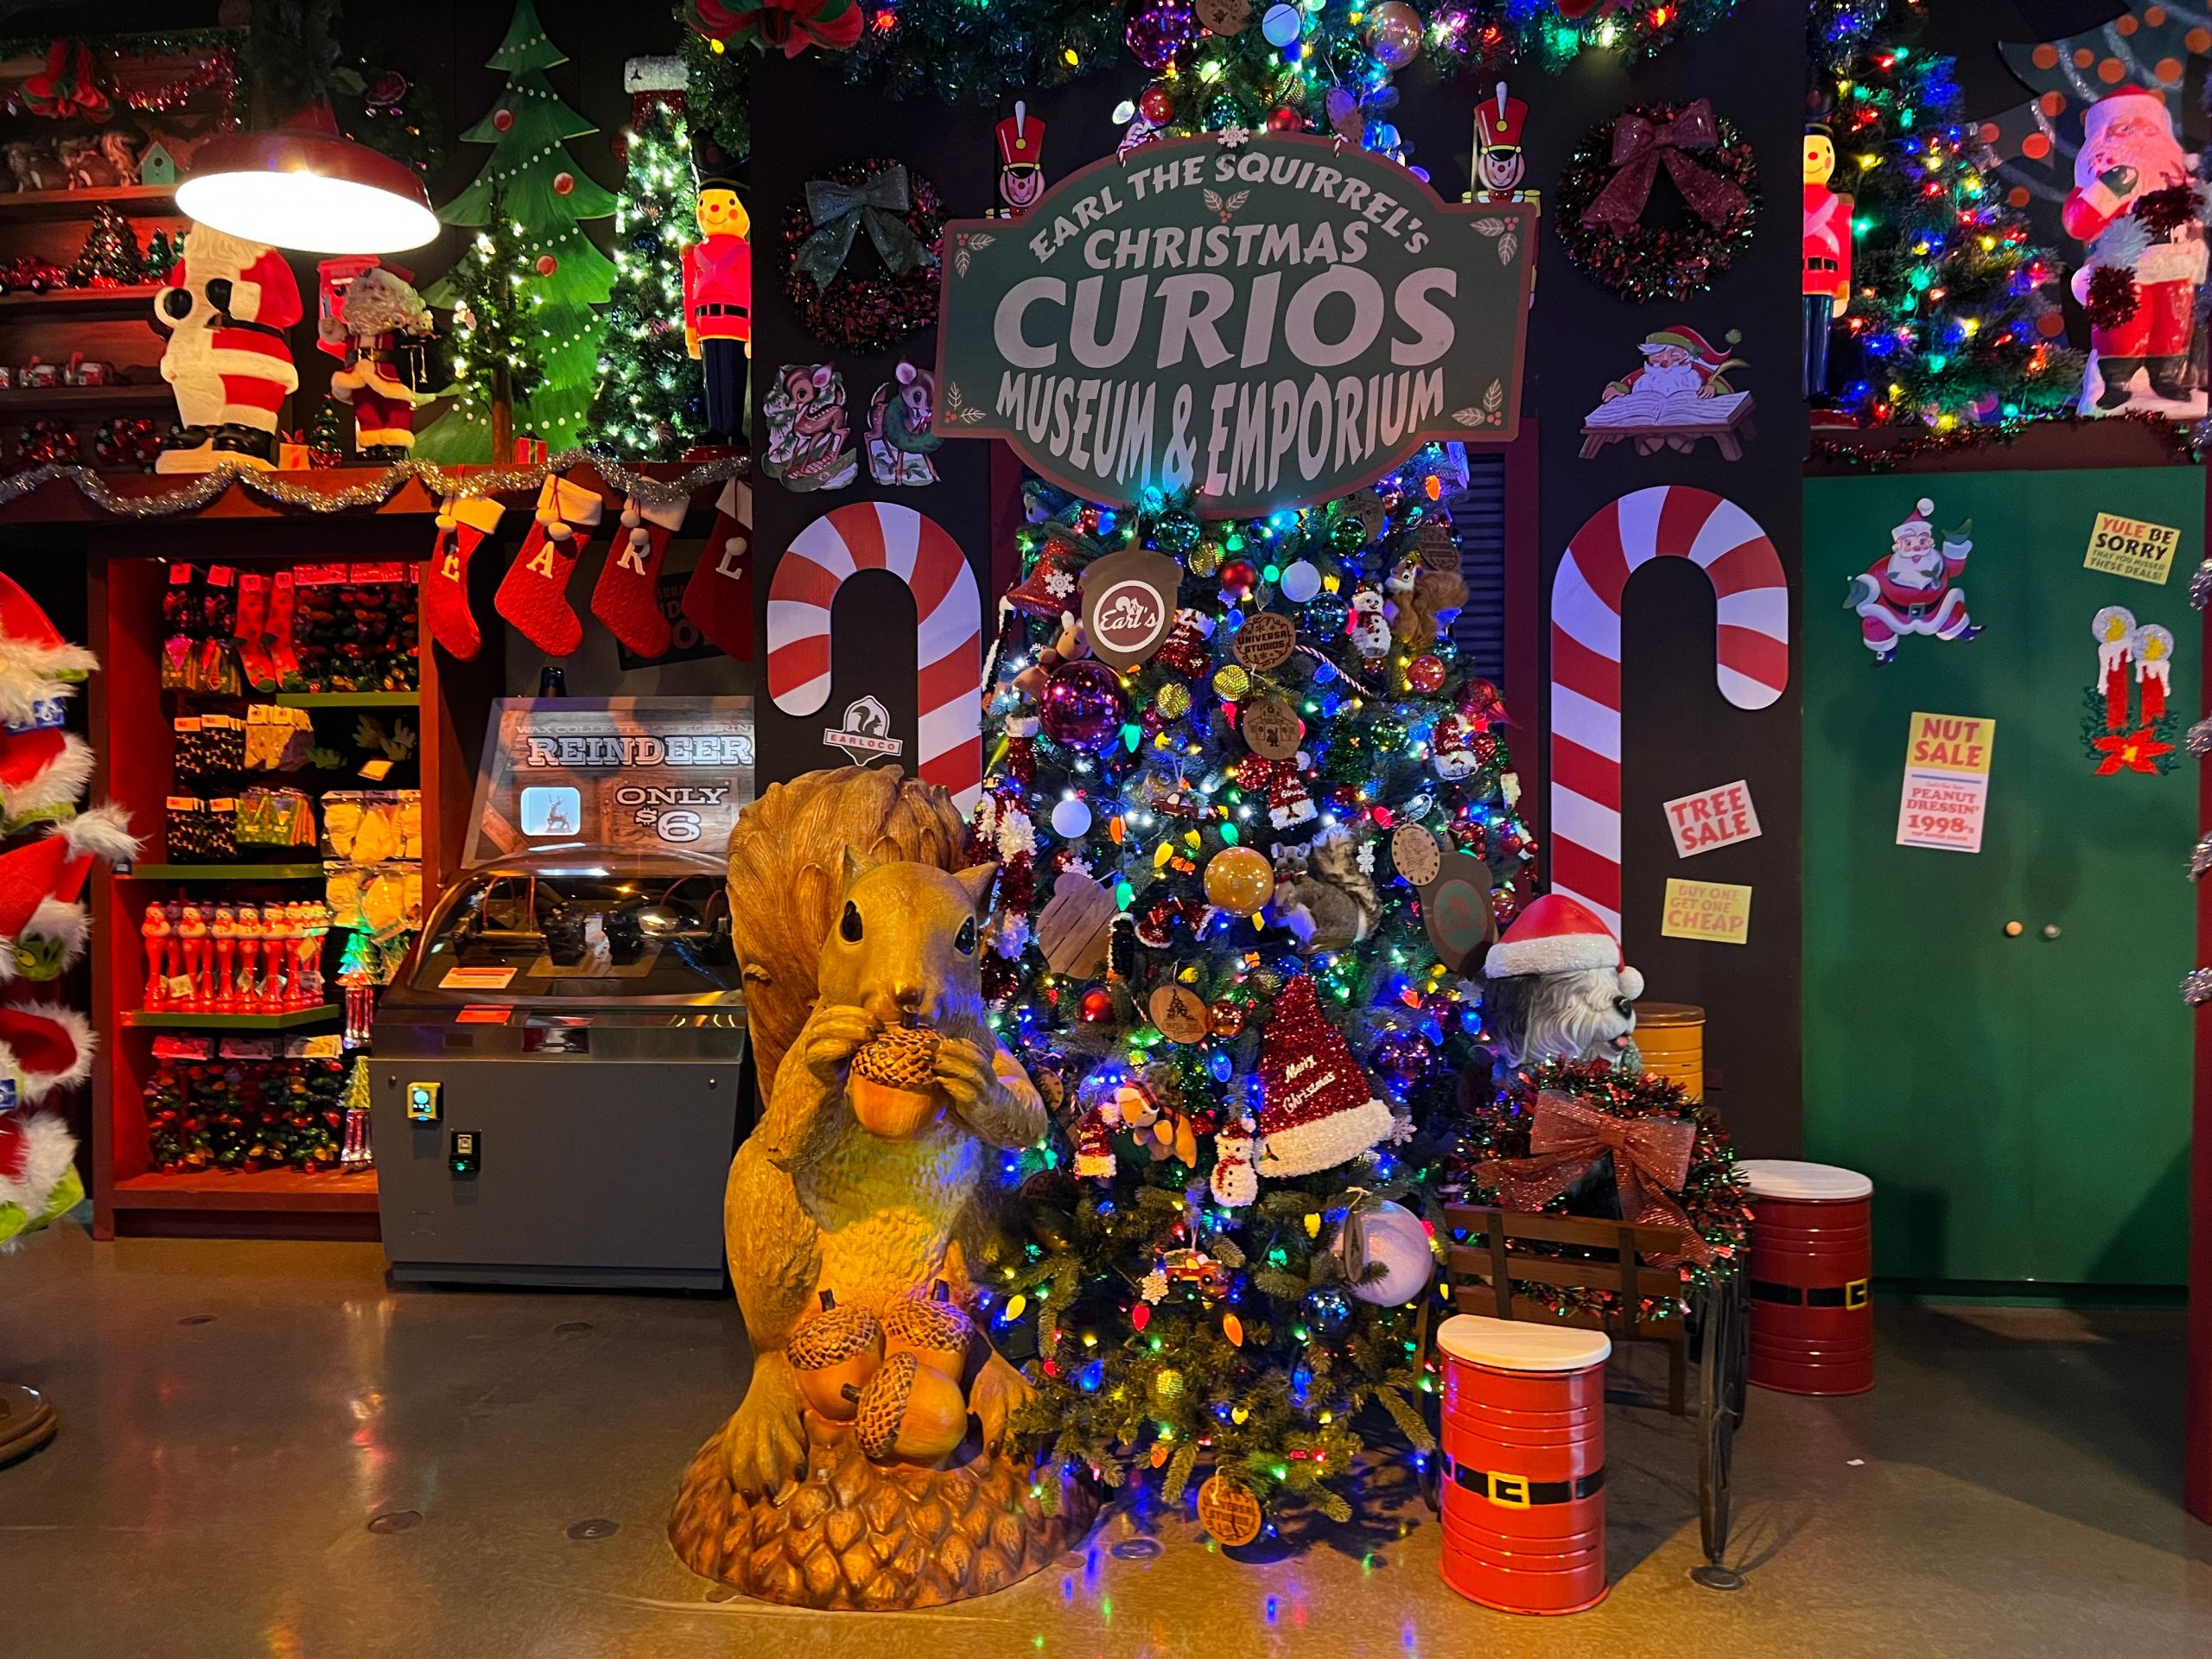 Earl the Squirrel's merchandise section, with a squirrel figurine and candy canes.